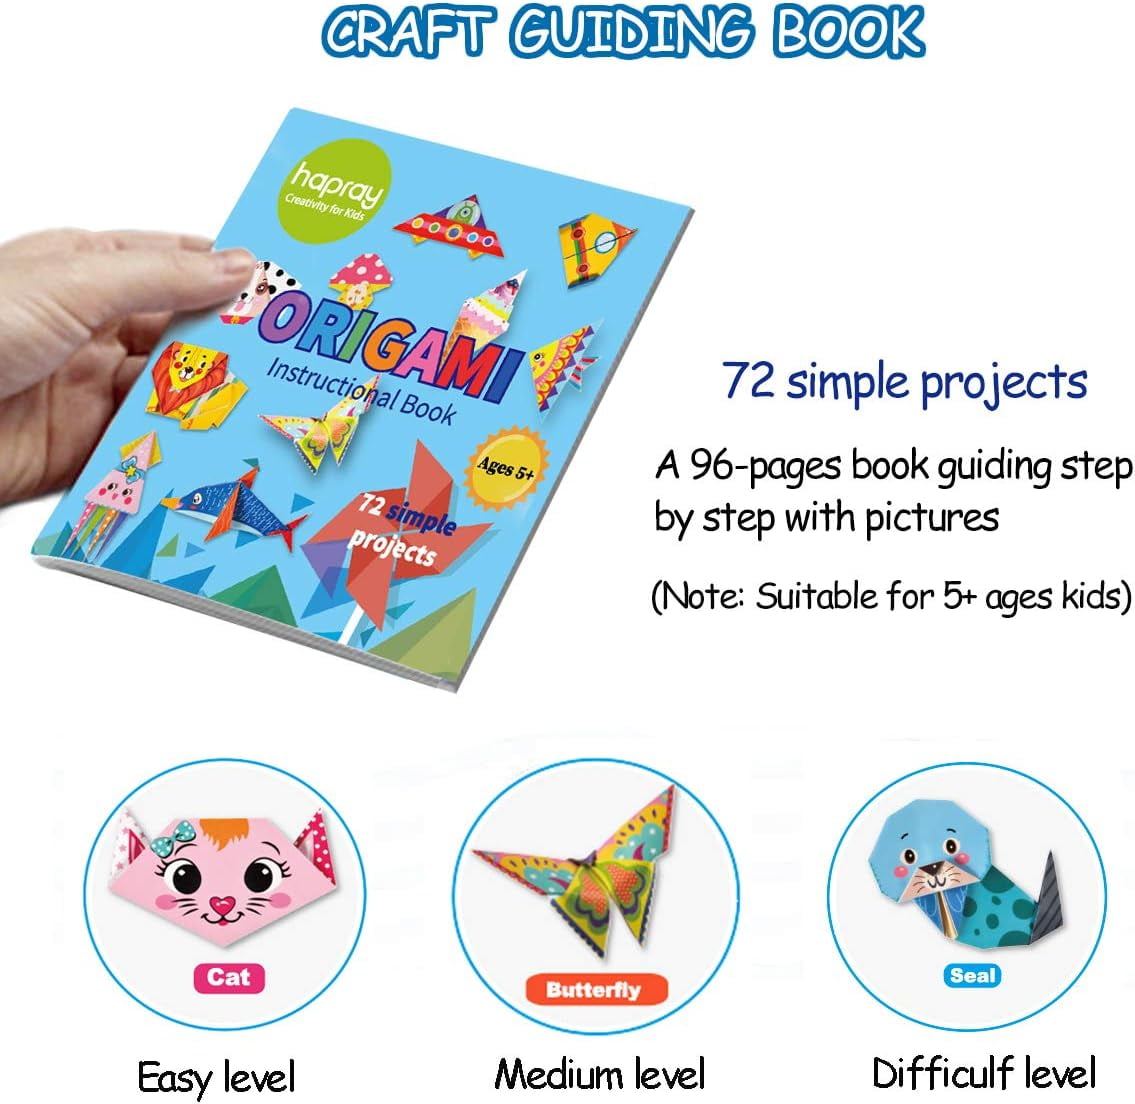 hapray Color Origami Paper for Kids, Origami Kit, 118 Sheets 6 inch Double Sided Origami with 54 Projects, 55 Pages Guiding Origami Book, for Craft